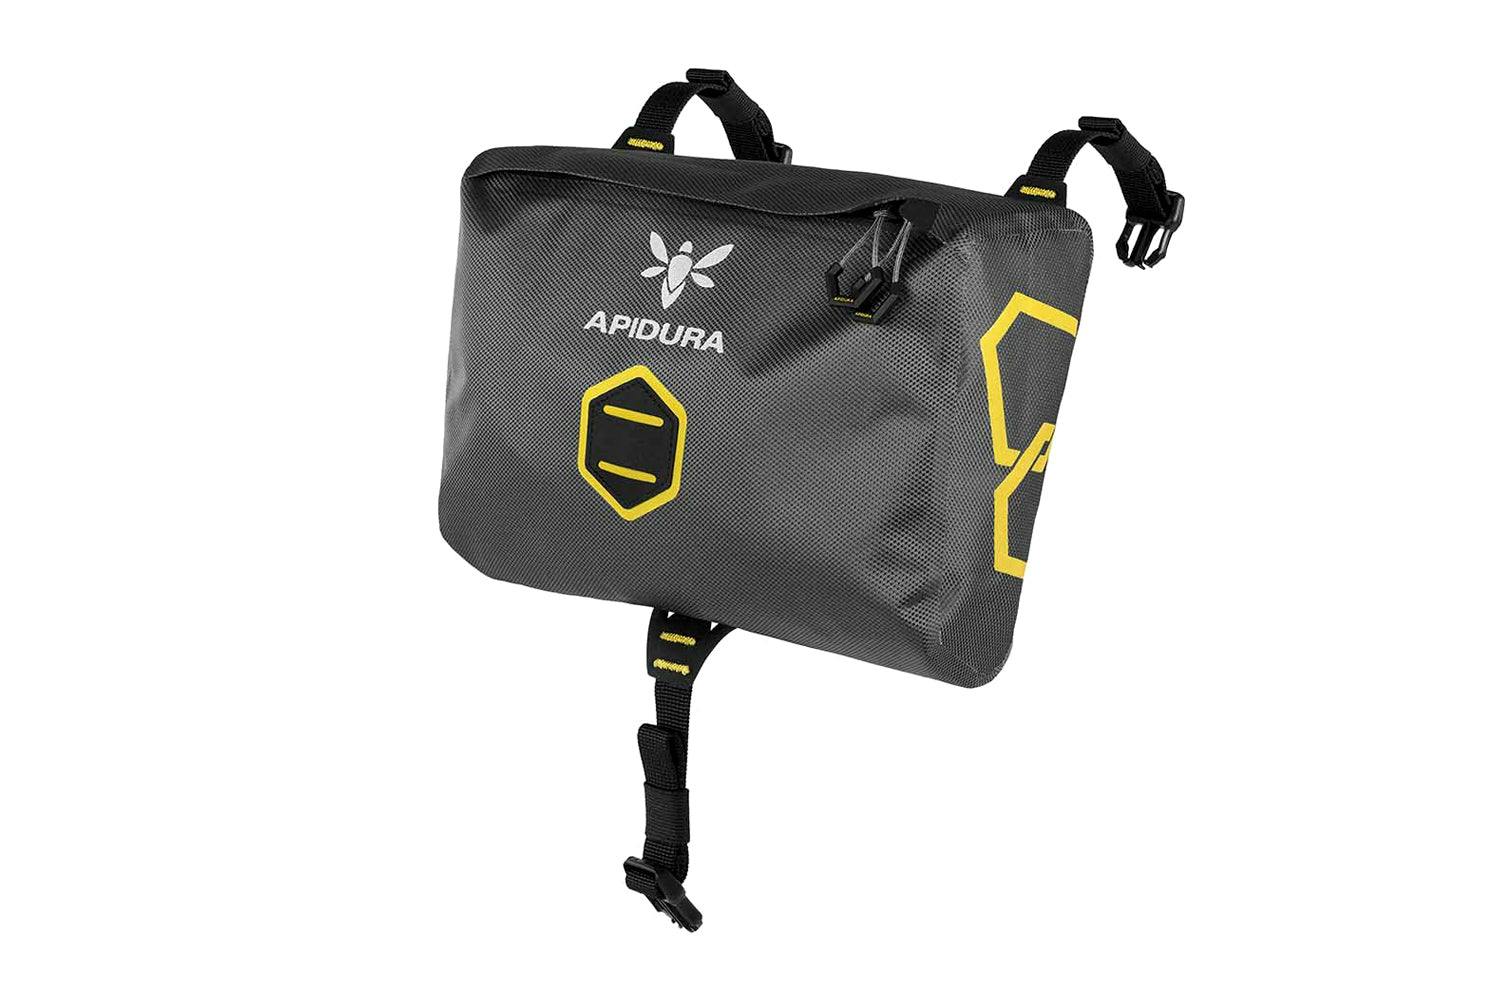 EXPEDITION Accessories bag